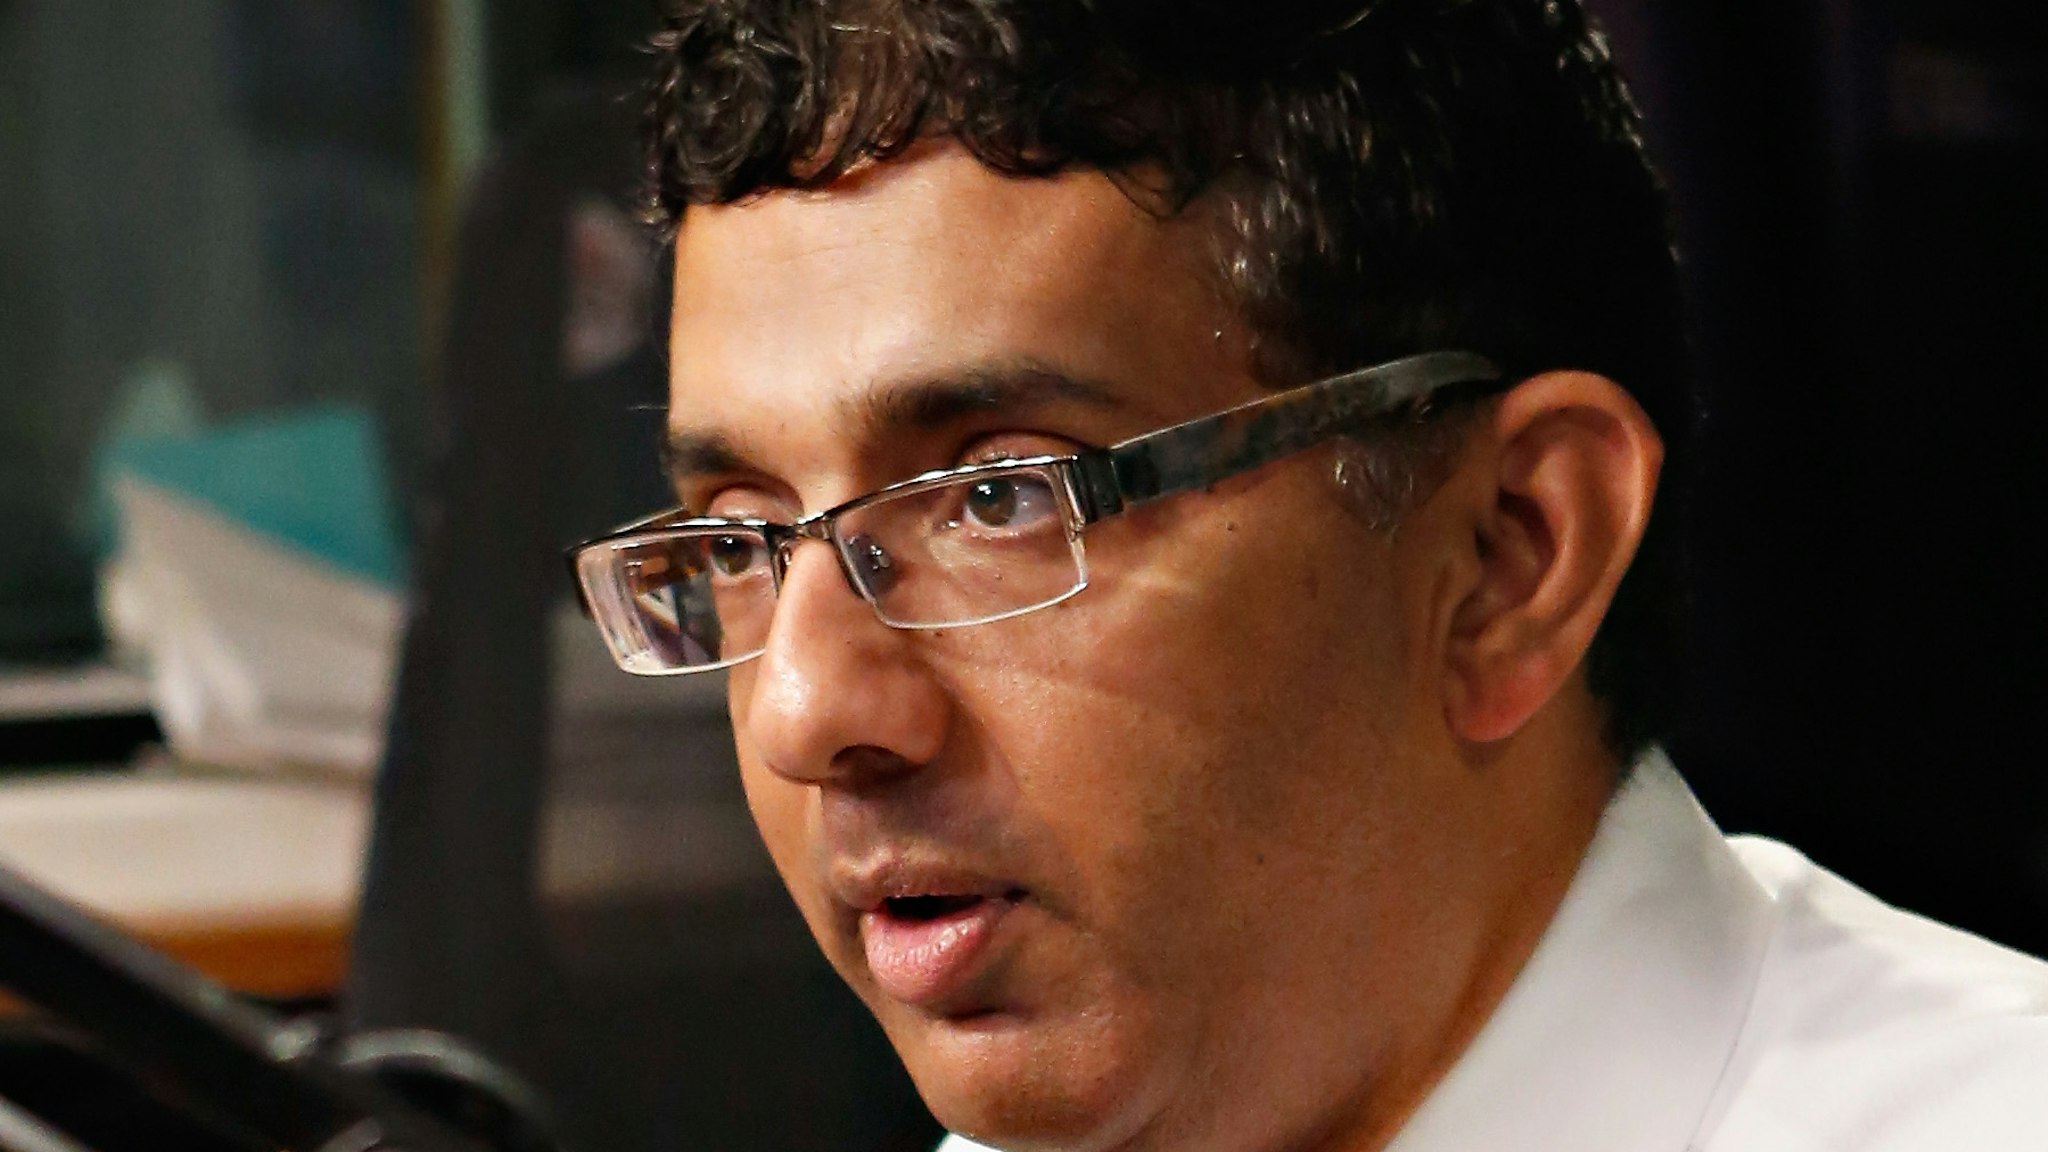 Author/ director Dinesh D'Souza visits 'The Opie & Anthony Show' at the SiriusXM Studio on September 27, 2012 in New York City.